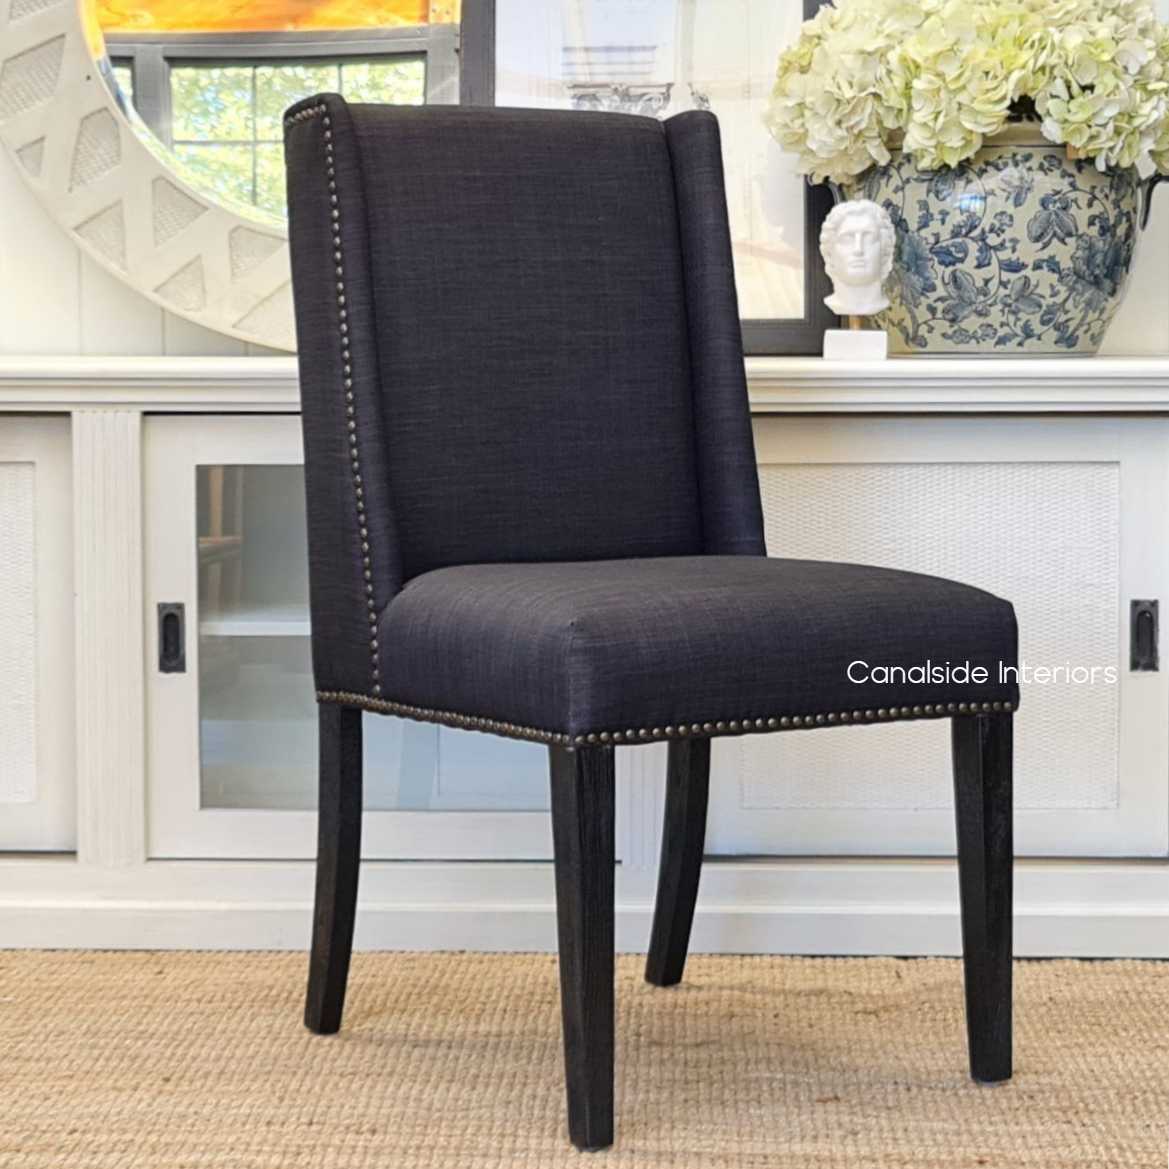 Leclerc Dining Chair Black charcoal upholstery black legs base, CHAIRS, HAMPTONS Style, PLANTATION Style, CHAIRS Dining, kitchen, dining room, winged